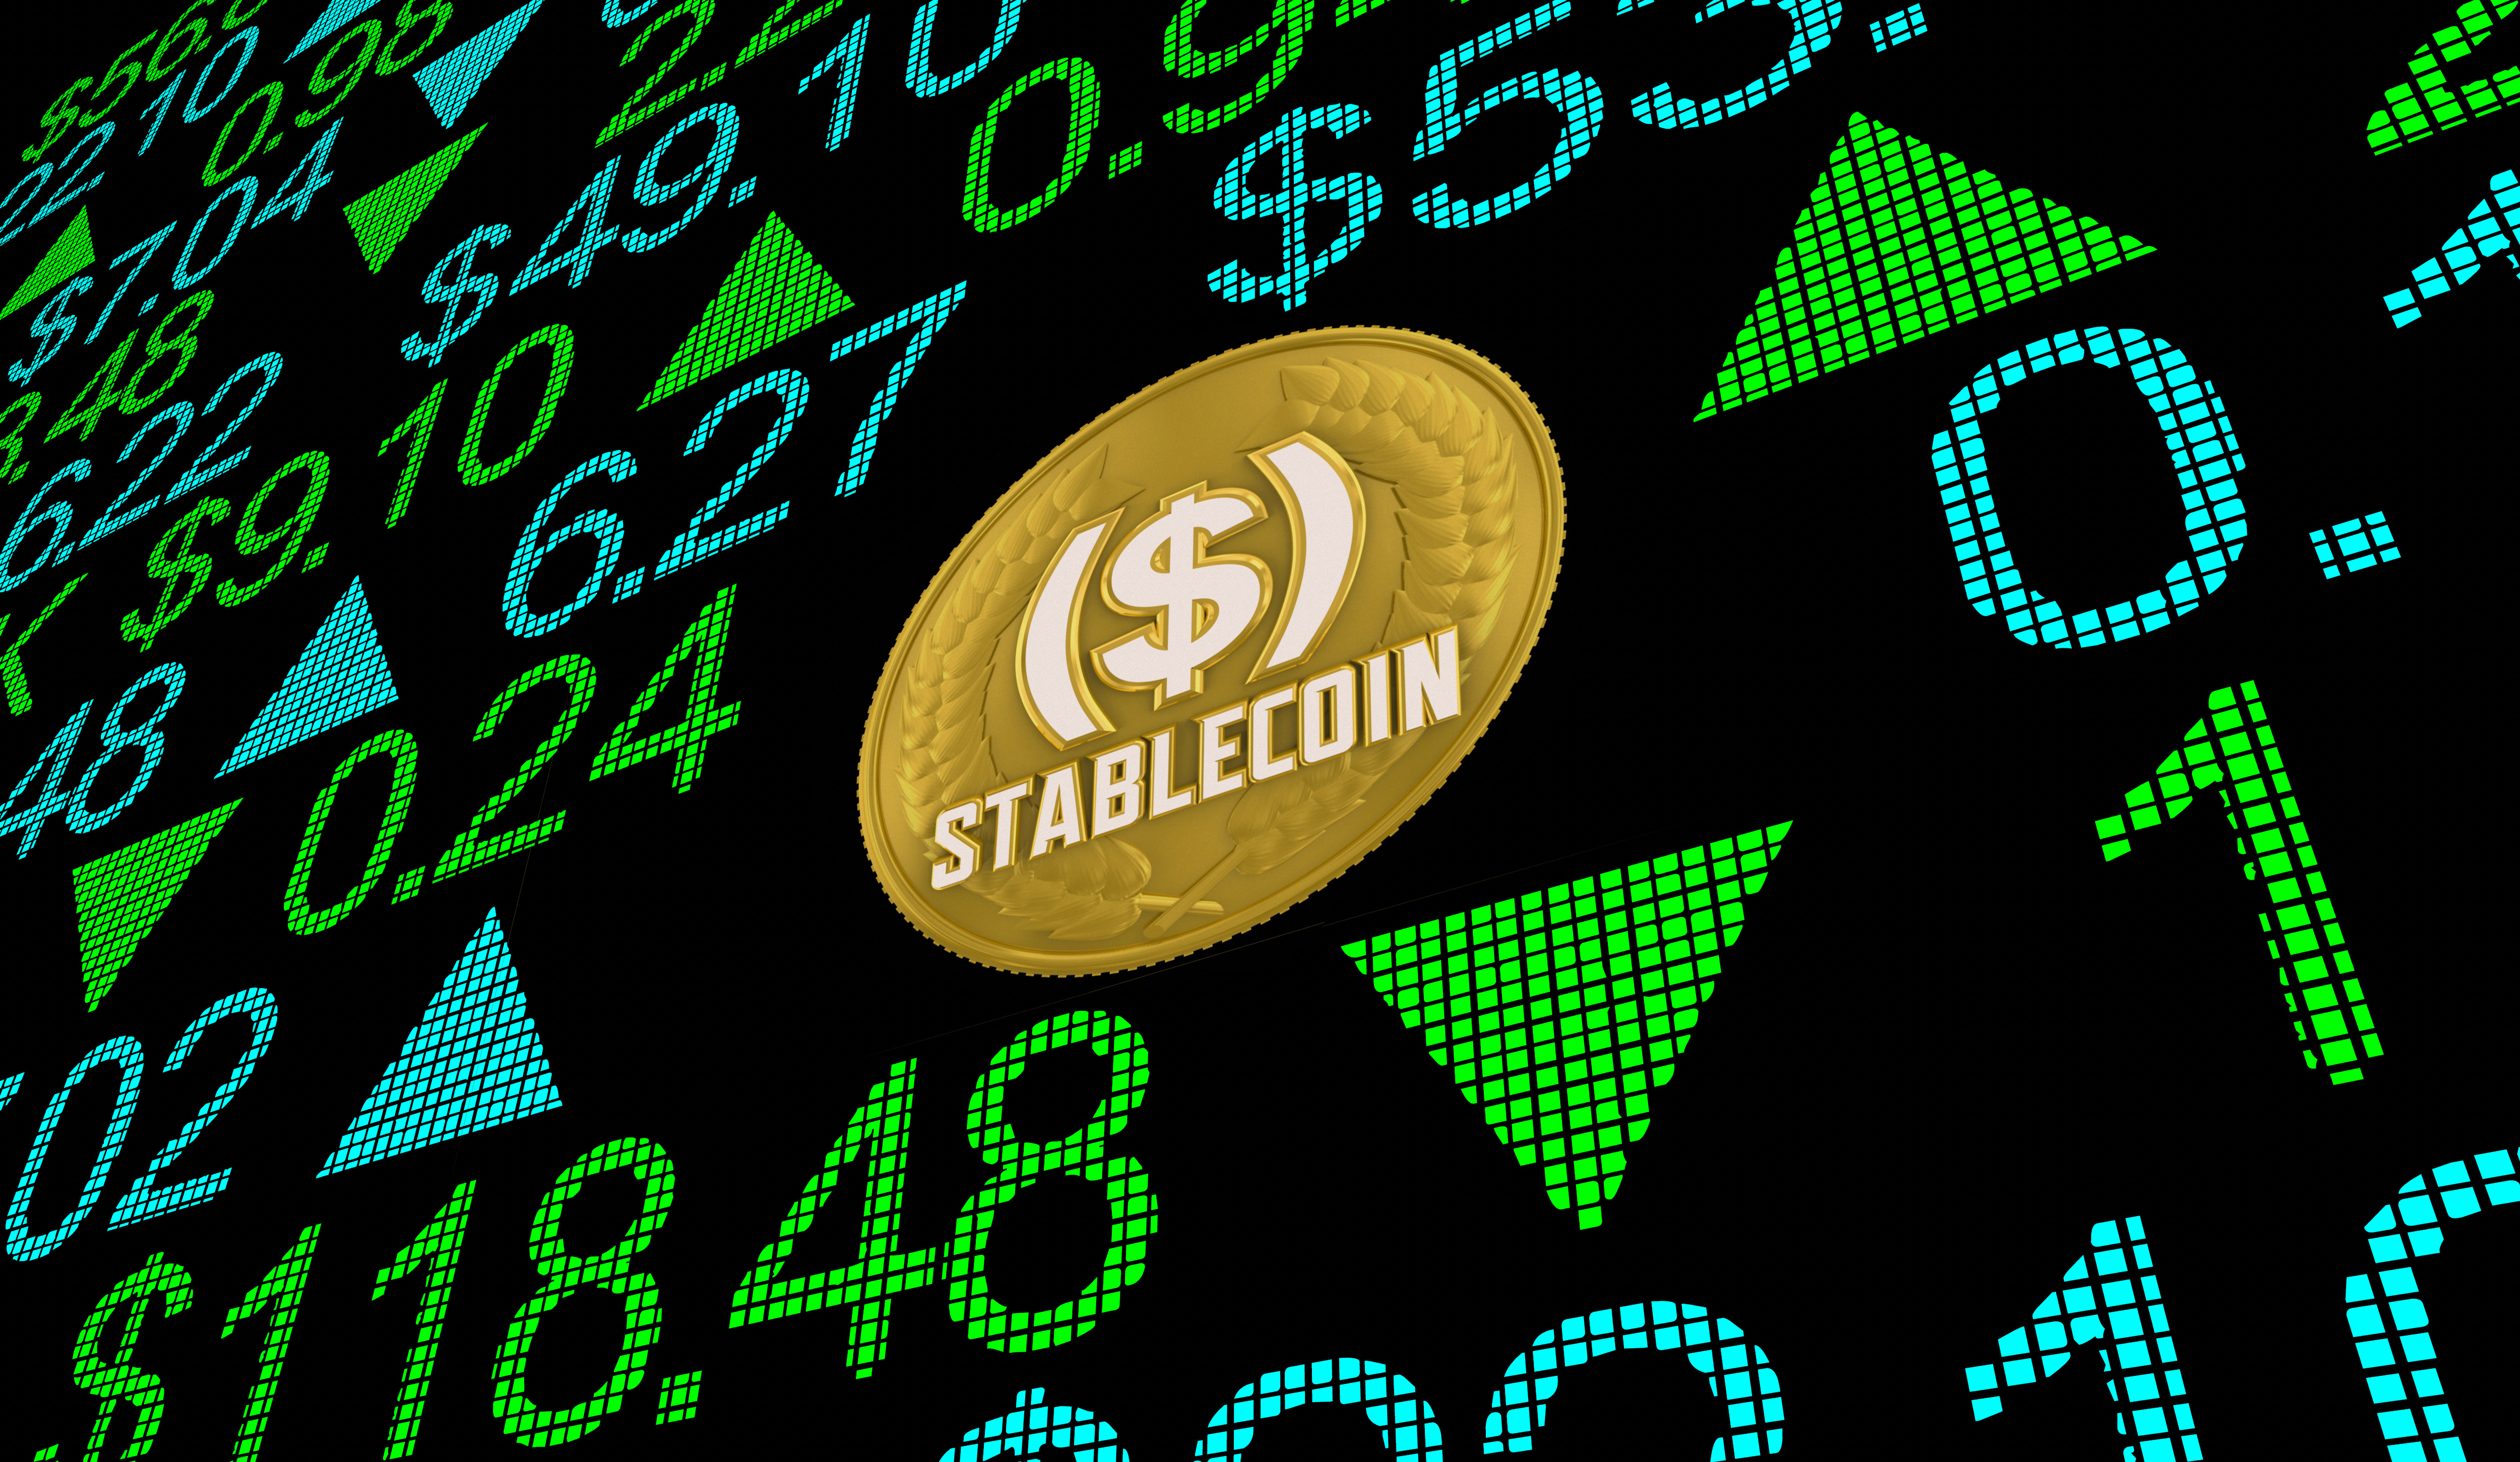 Stablecoins are growing rapidly in transaction volume, but the U.S. is not keeping pace